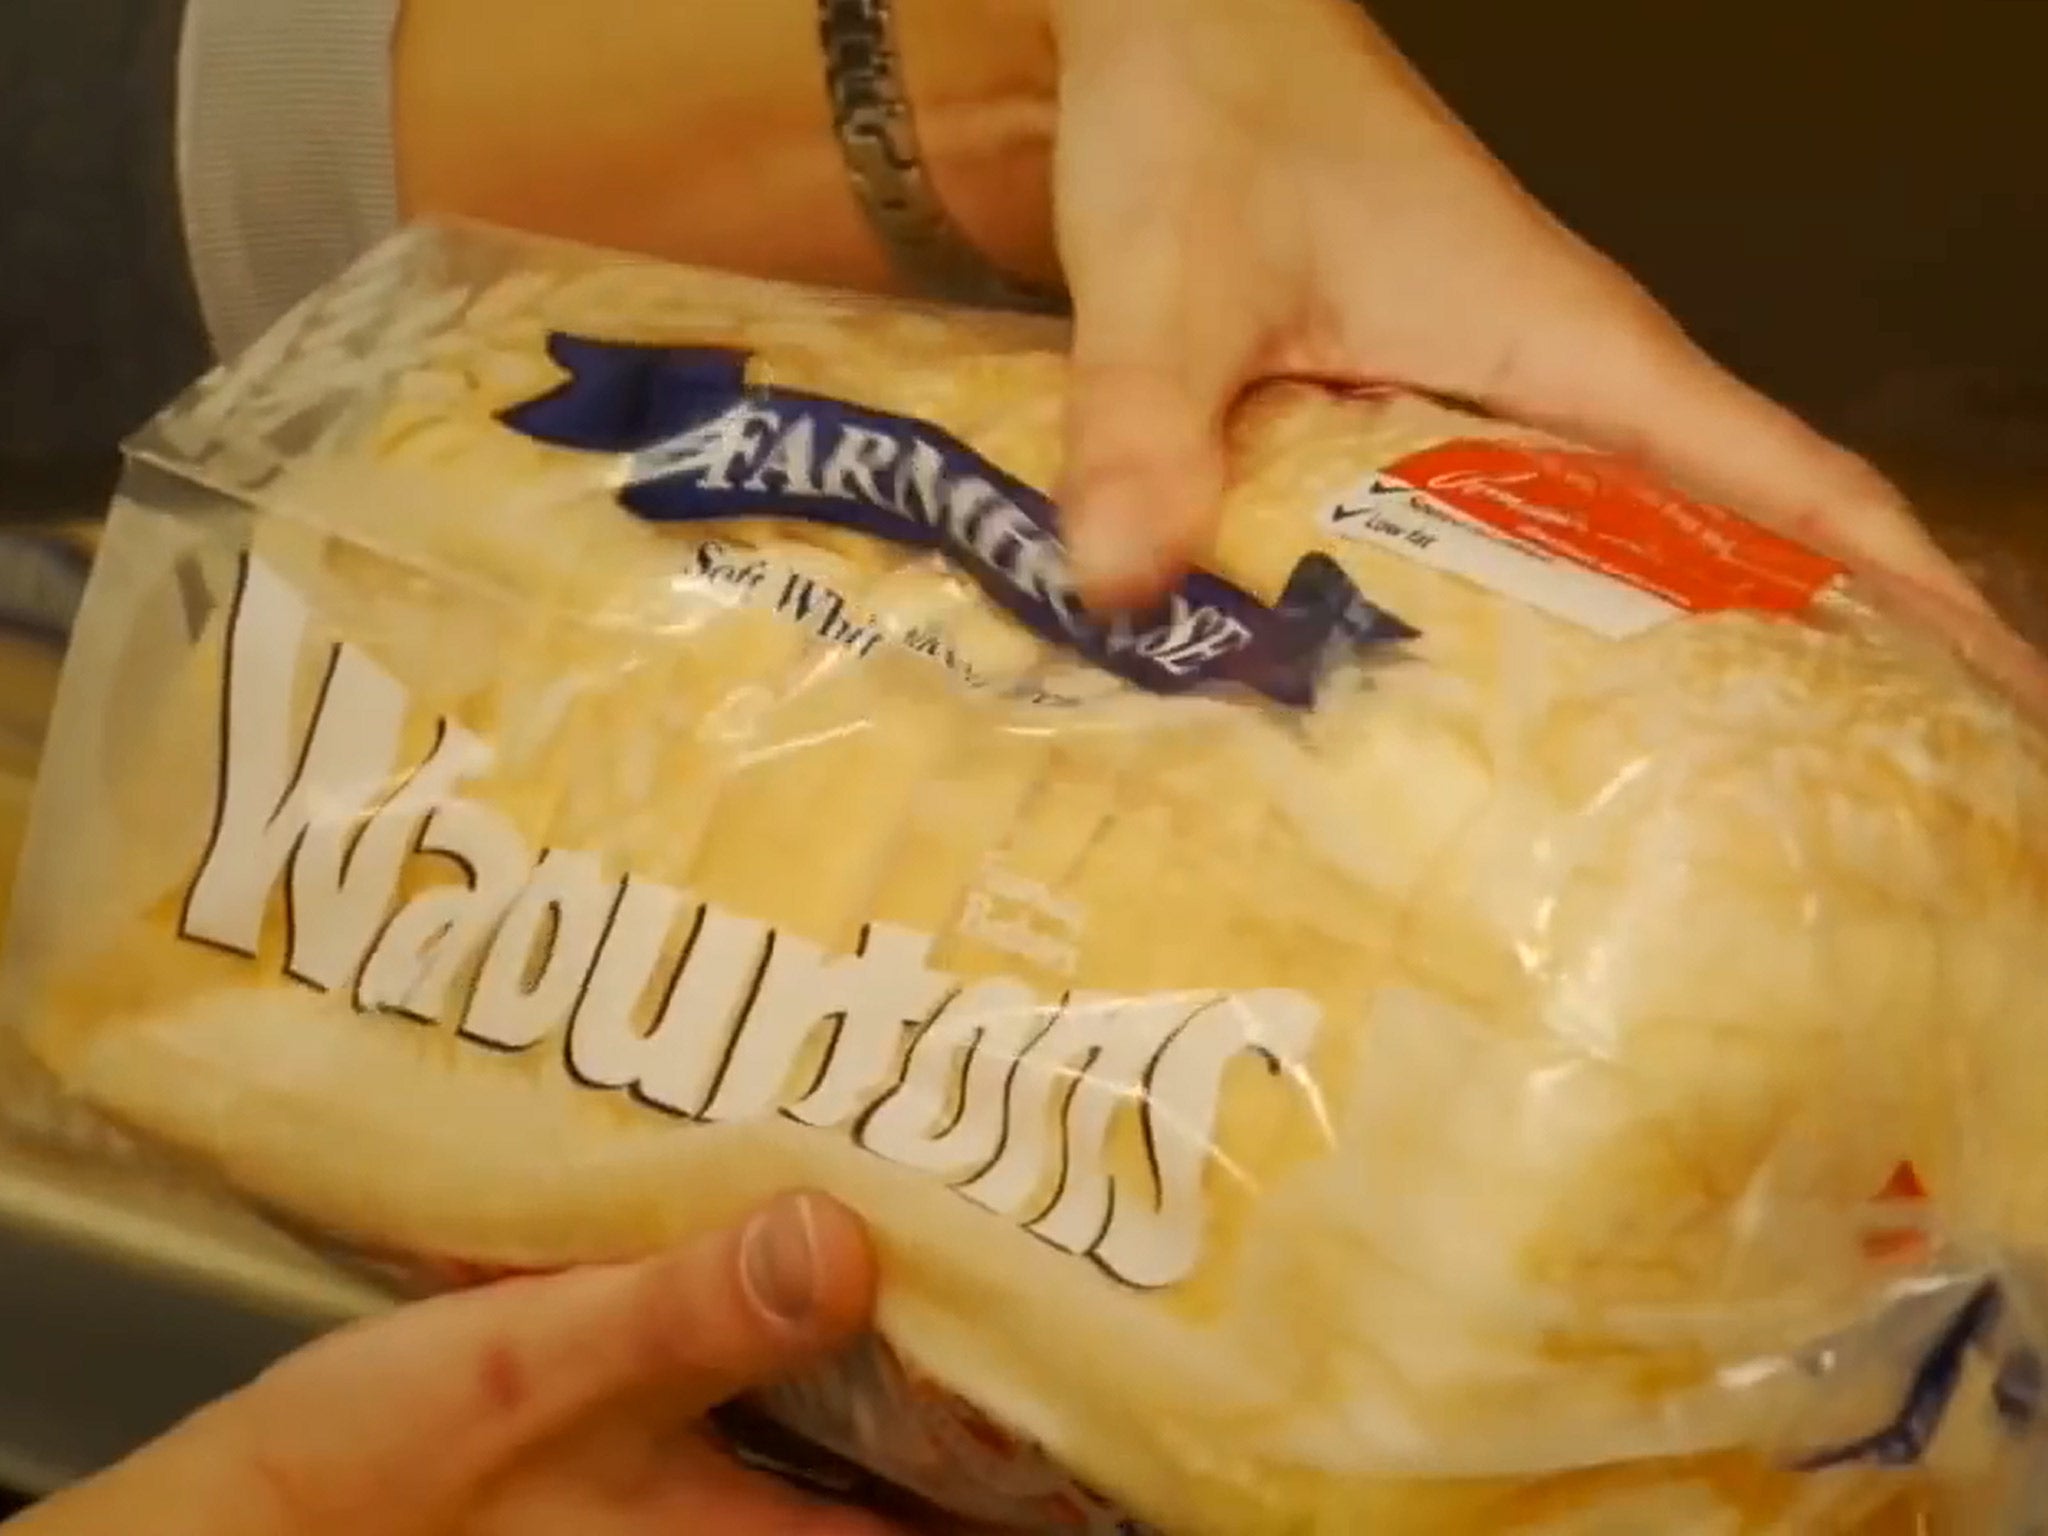 Warburtons topped the list of best British brands